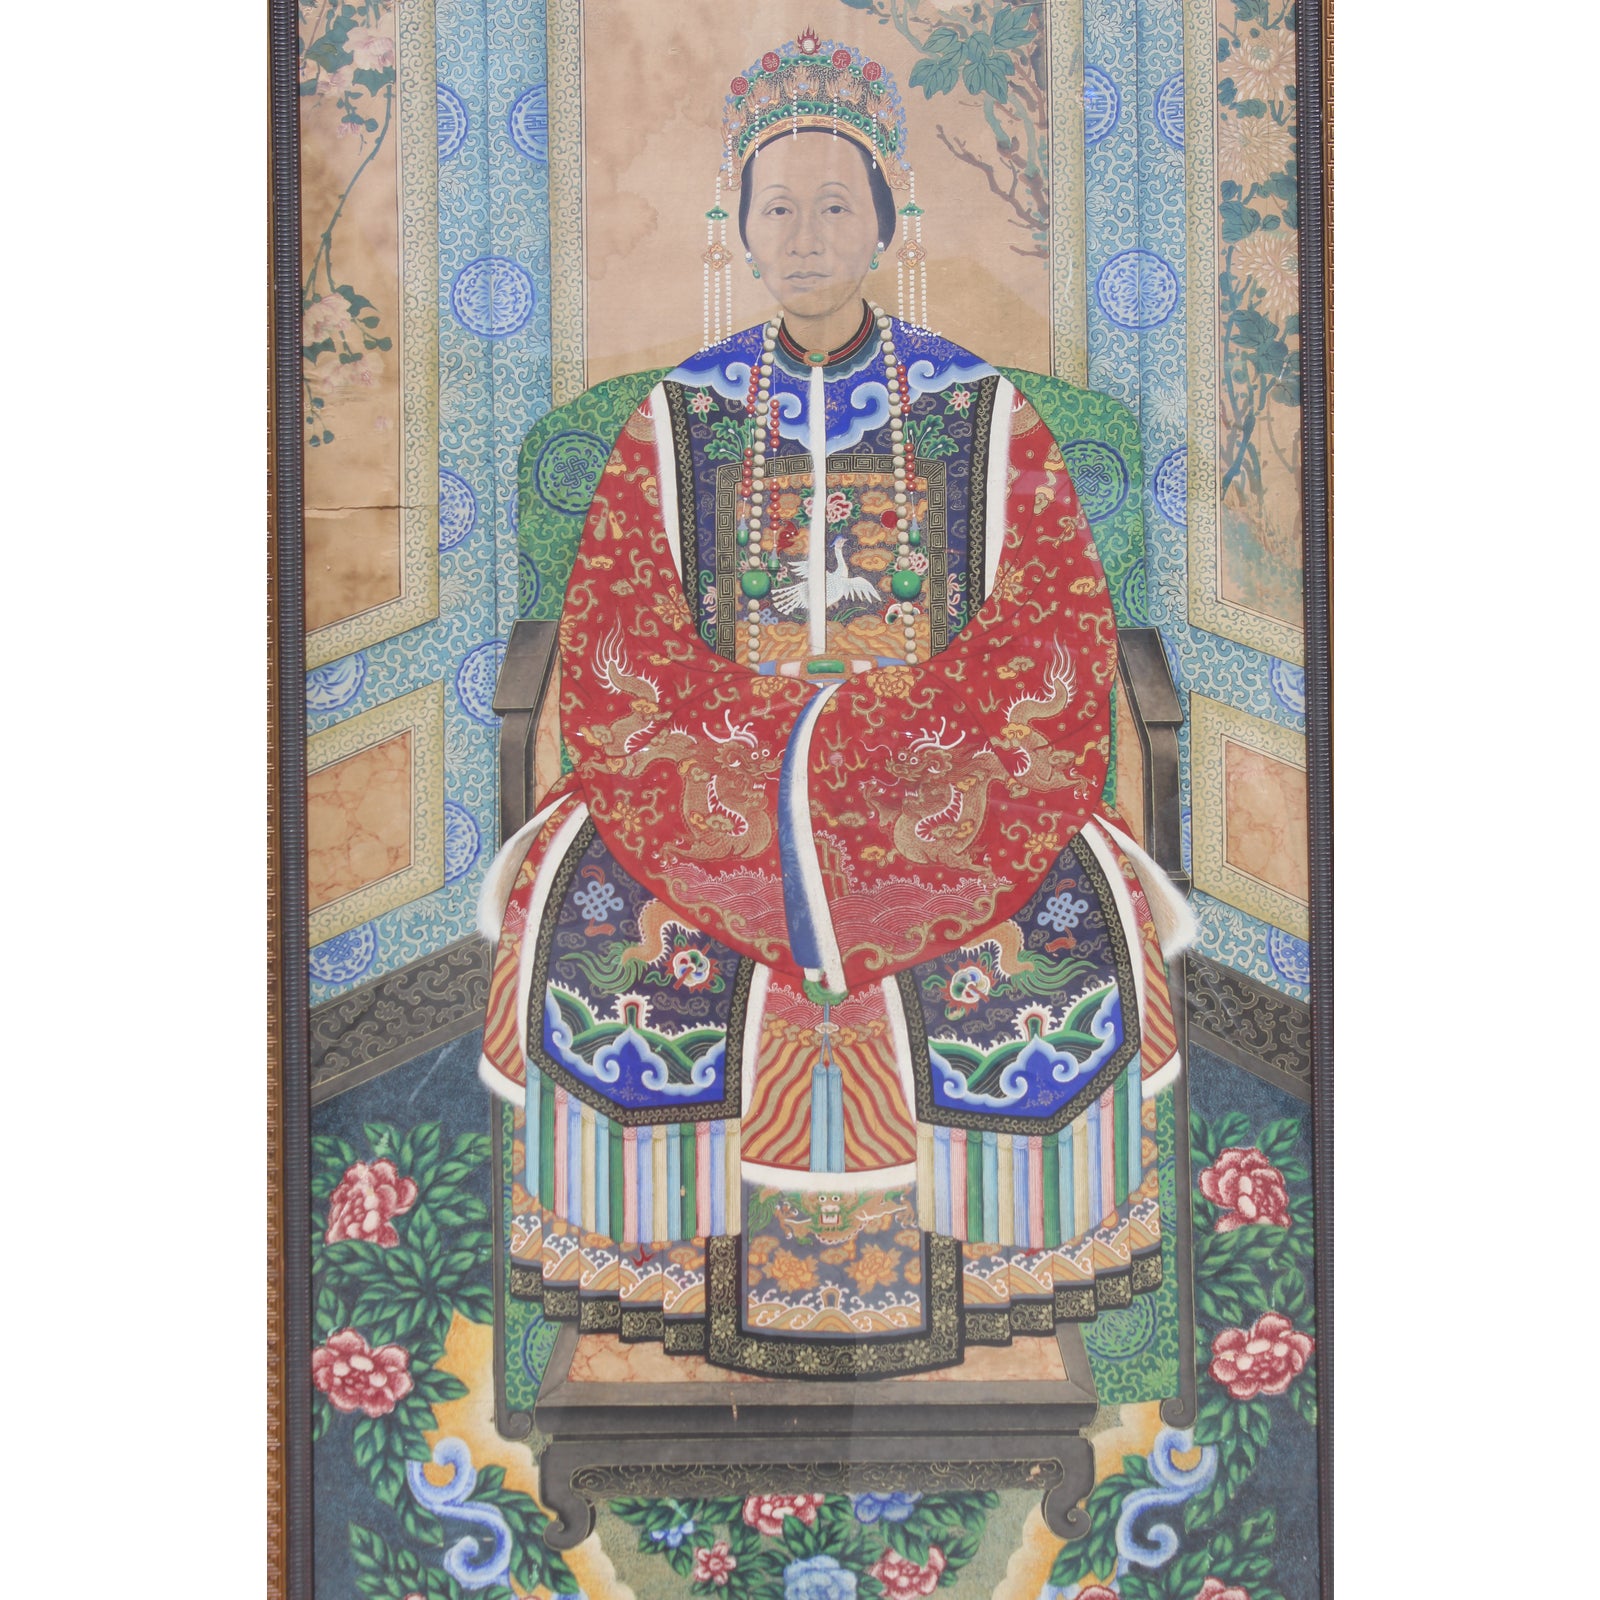 late-qing-dynasty-portrait-of-an-empress-court-lady-0759